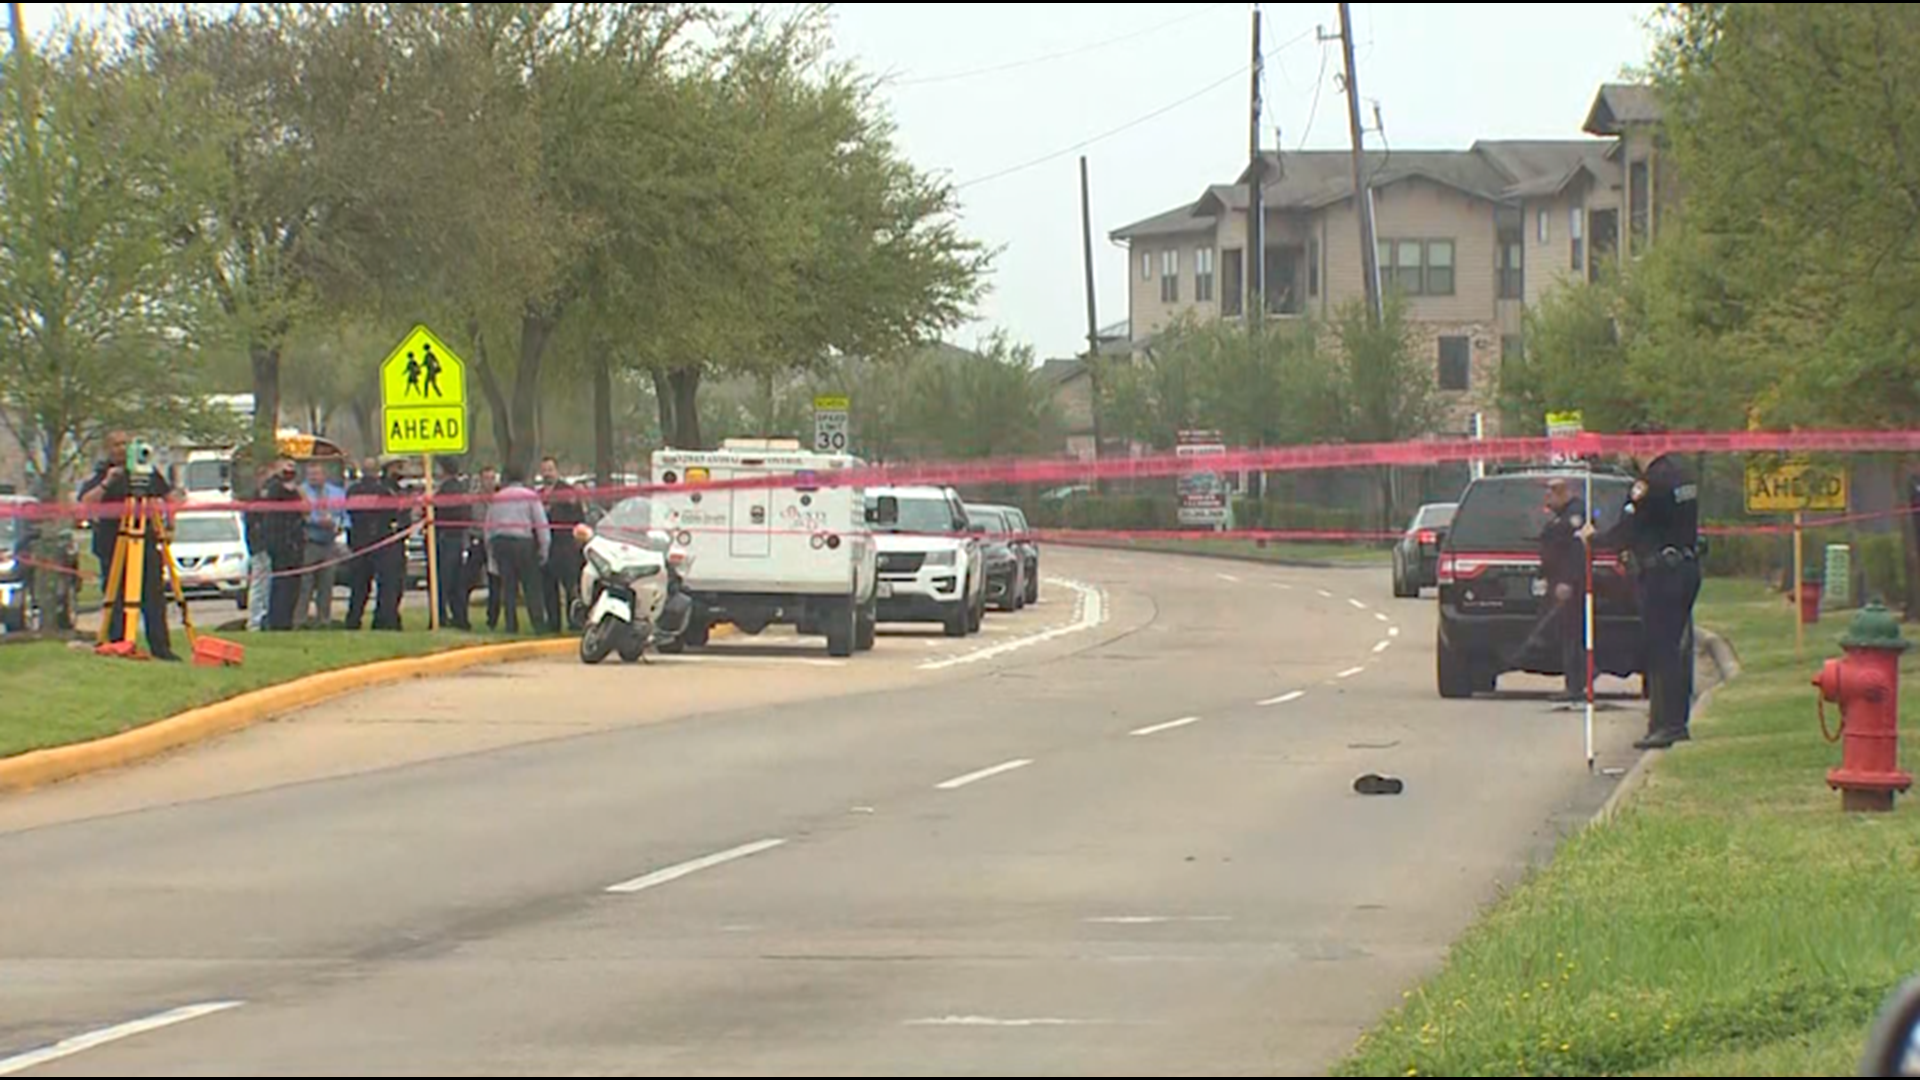 Harris County Sheriff's Office investigators said the suspect ran from responding deputies, was Tased and then ran onto Greenhouse Road, where he was struck.